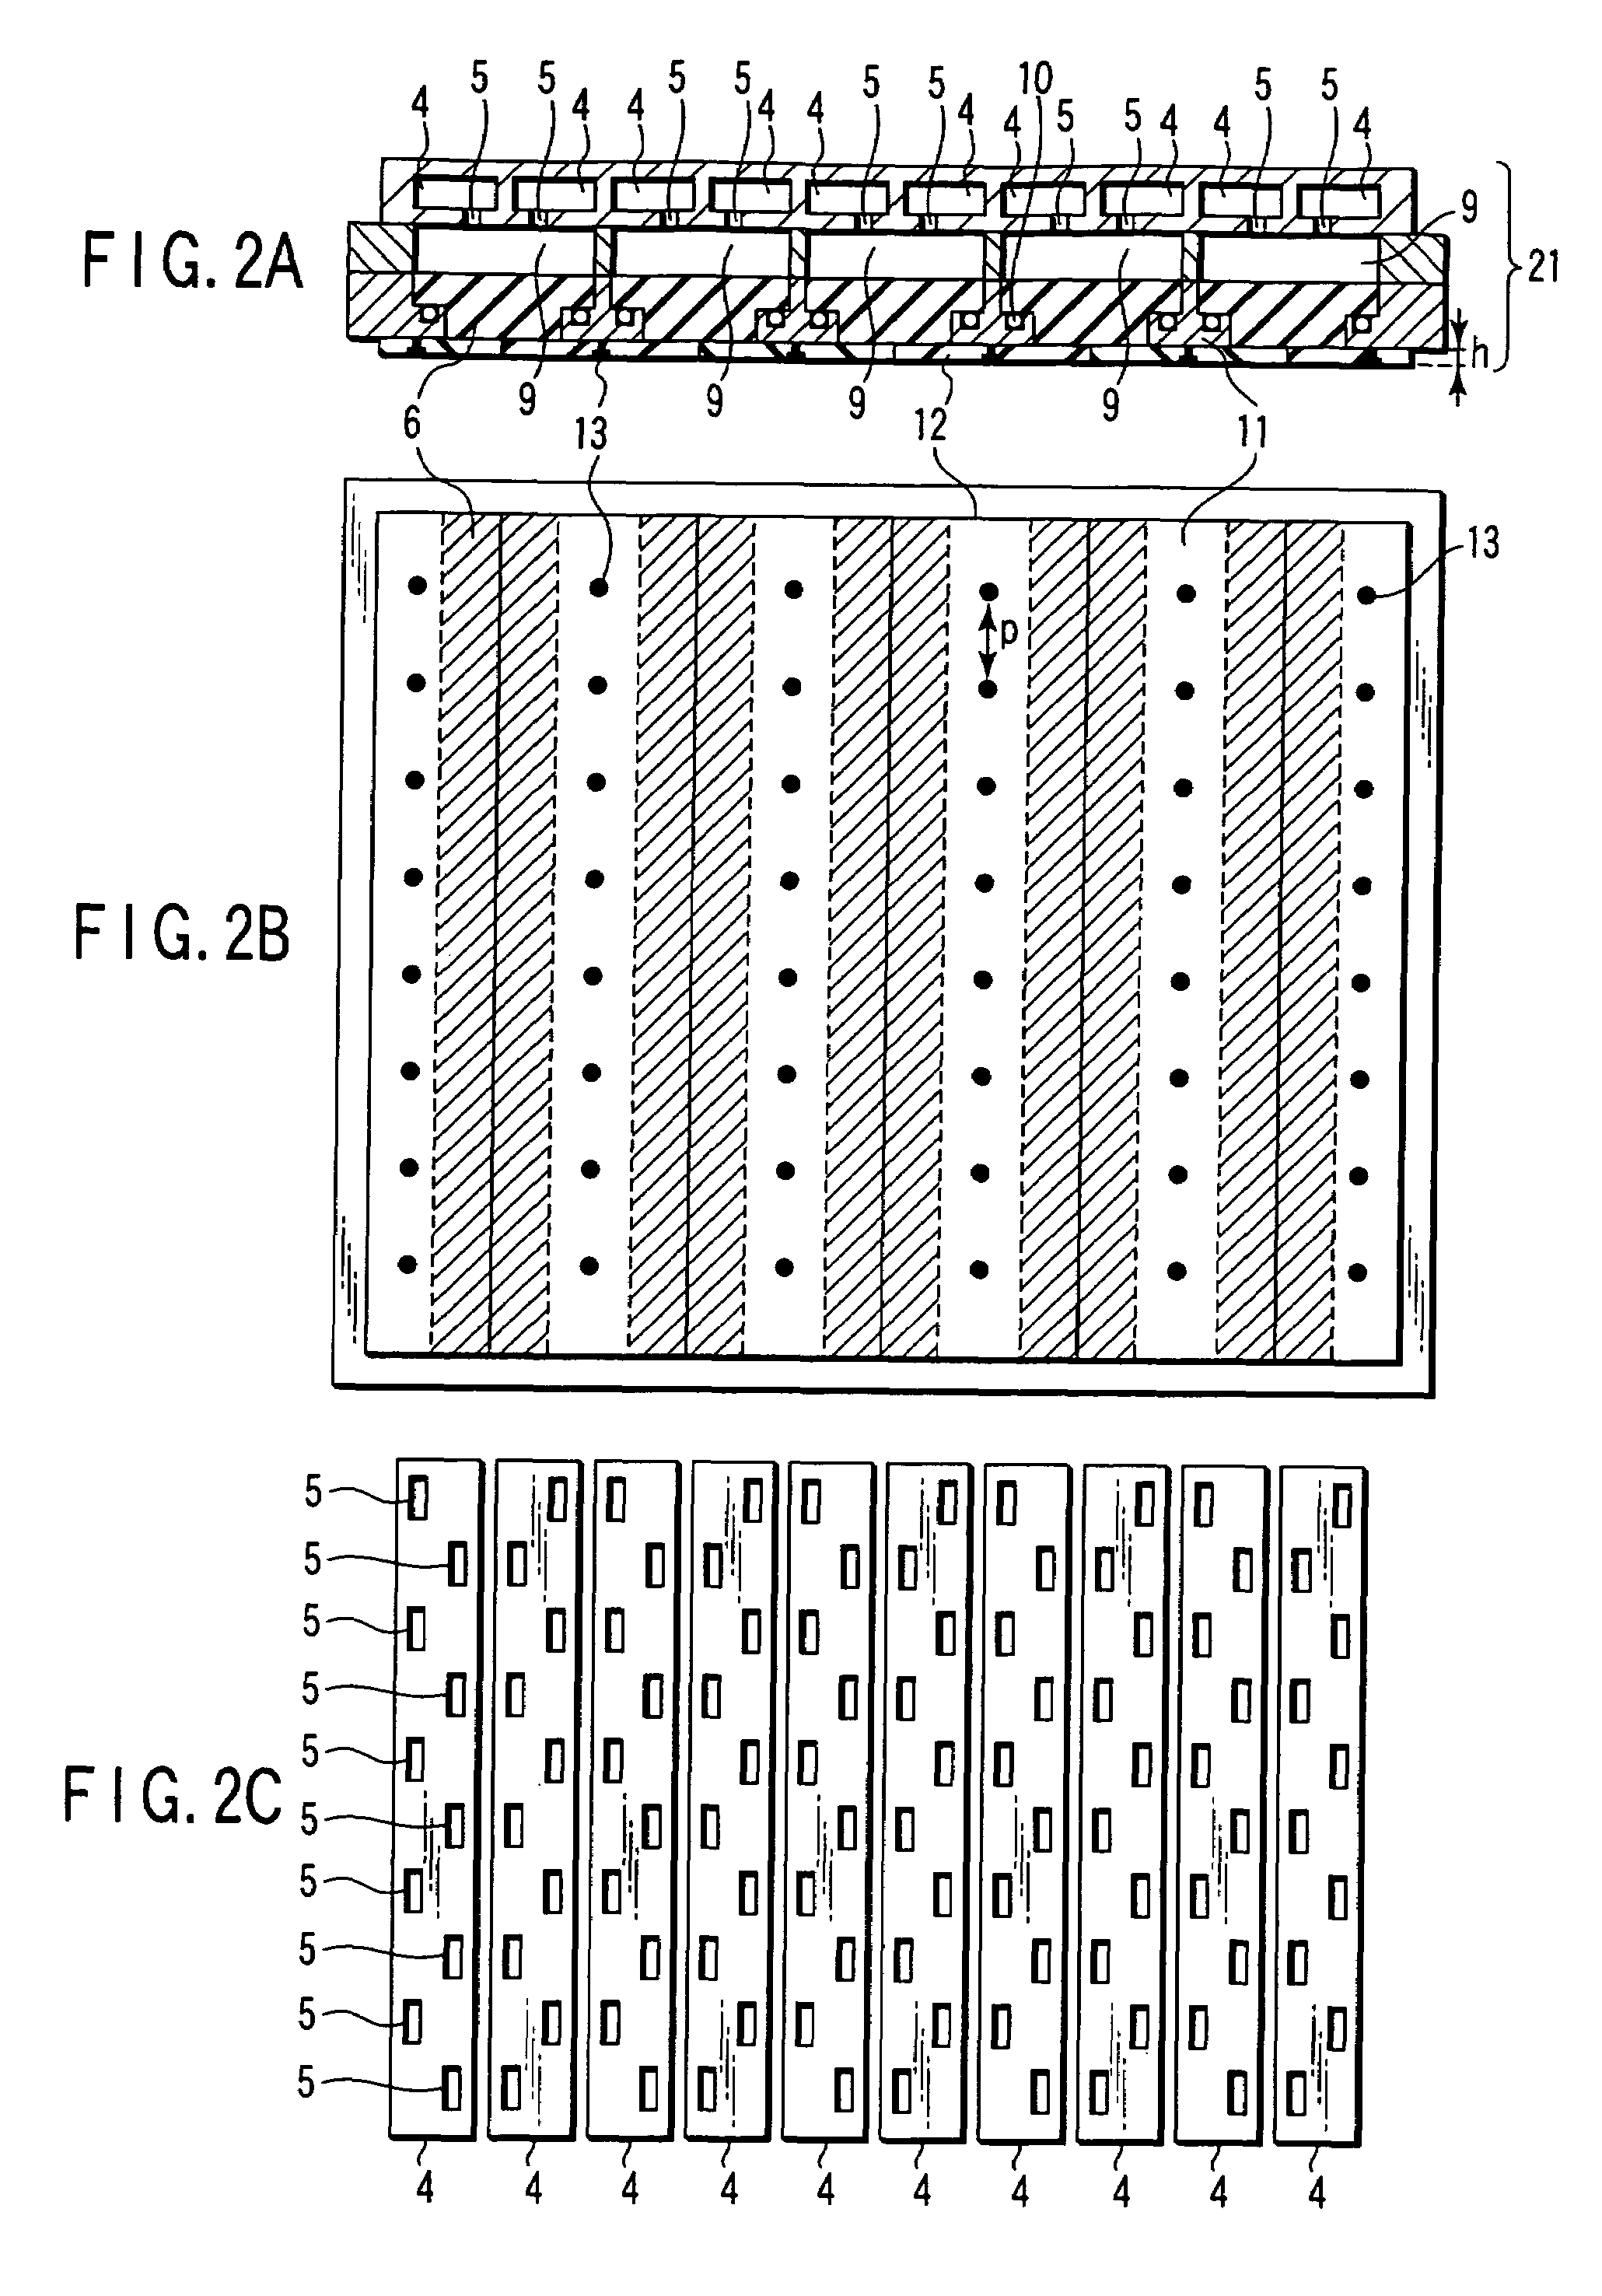 Plasma processing apparatus with dielectric plates and fixing member wavelength dependent spacing